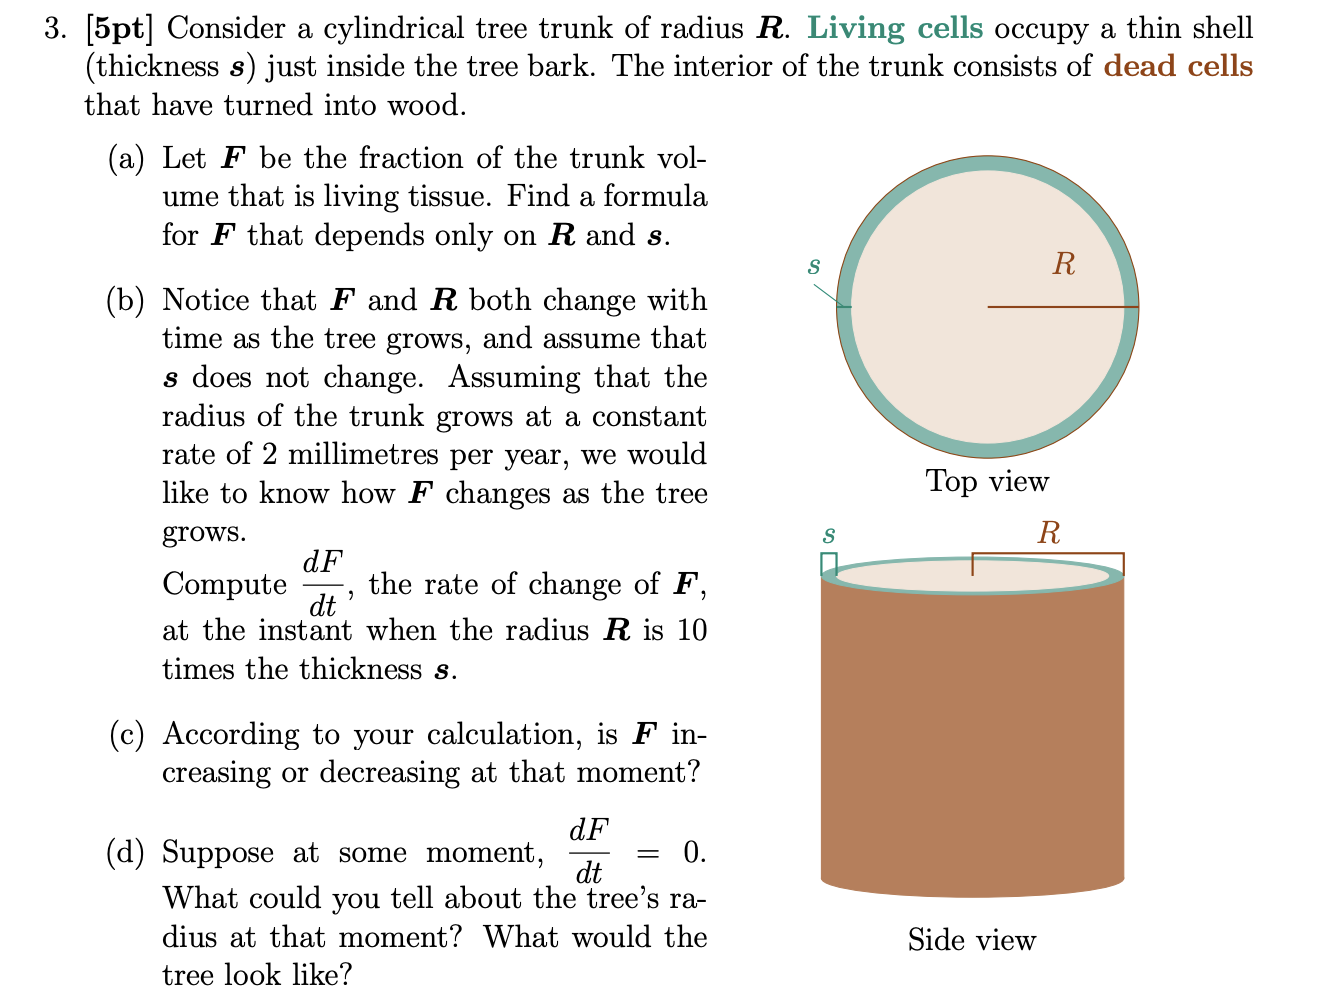 3. [5pt] Consider a cylindrical tree trunk of radius R. Living cells occupy a thin shell (thickness s) just inside the tree b